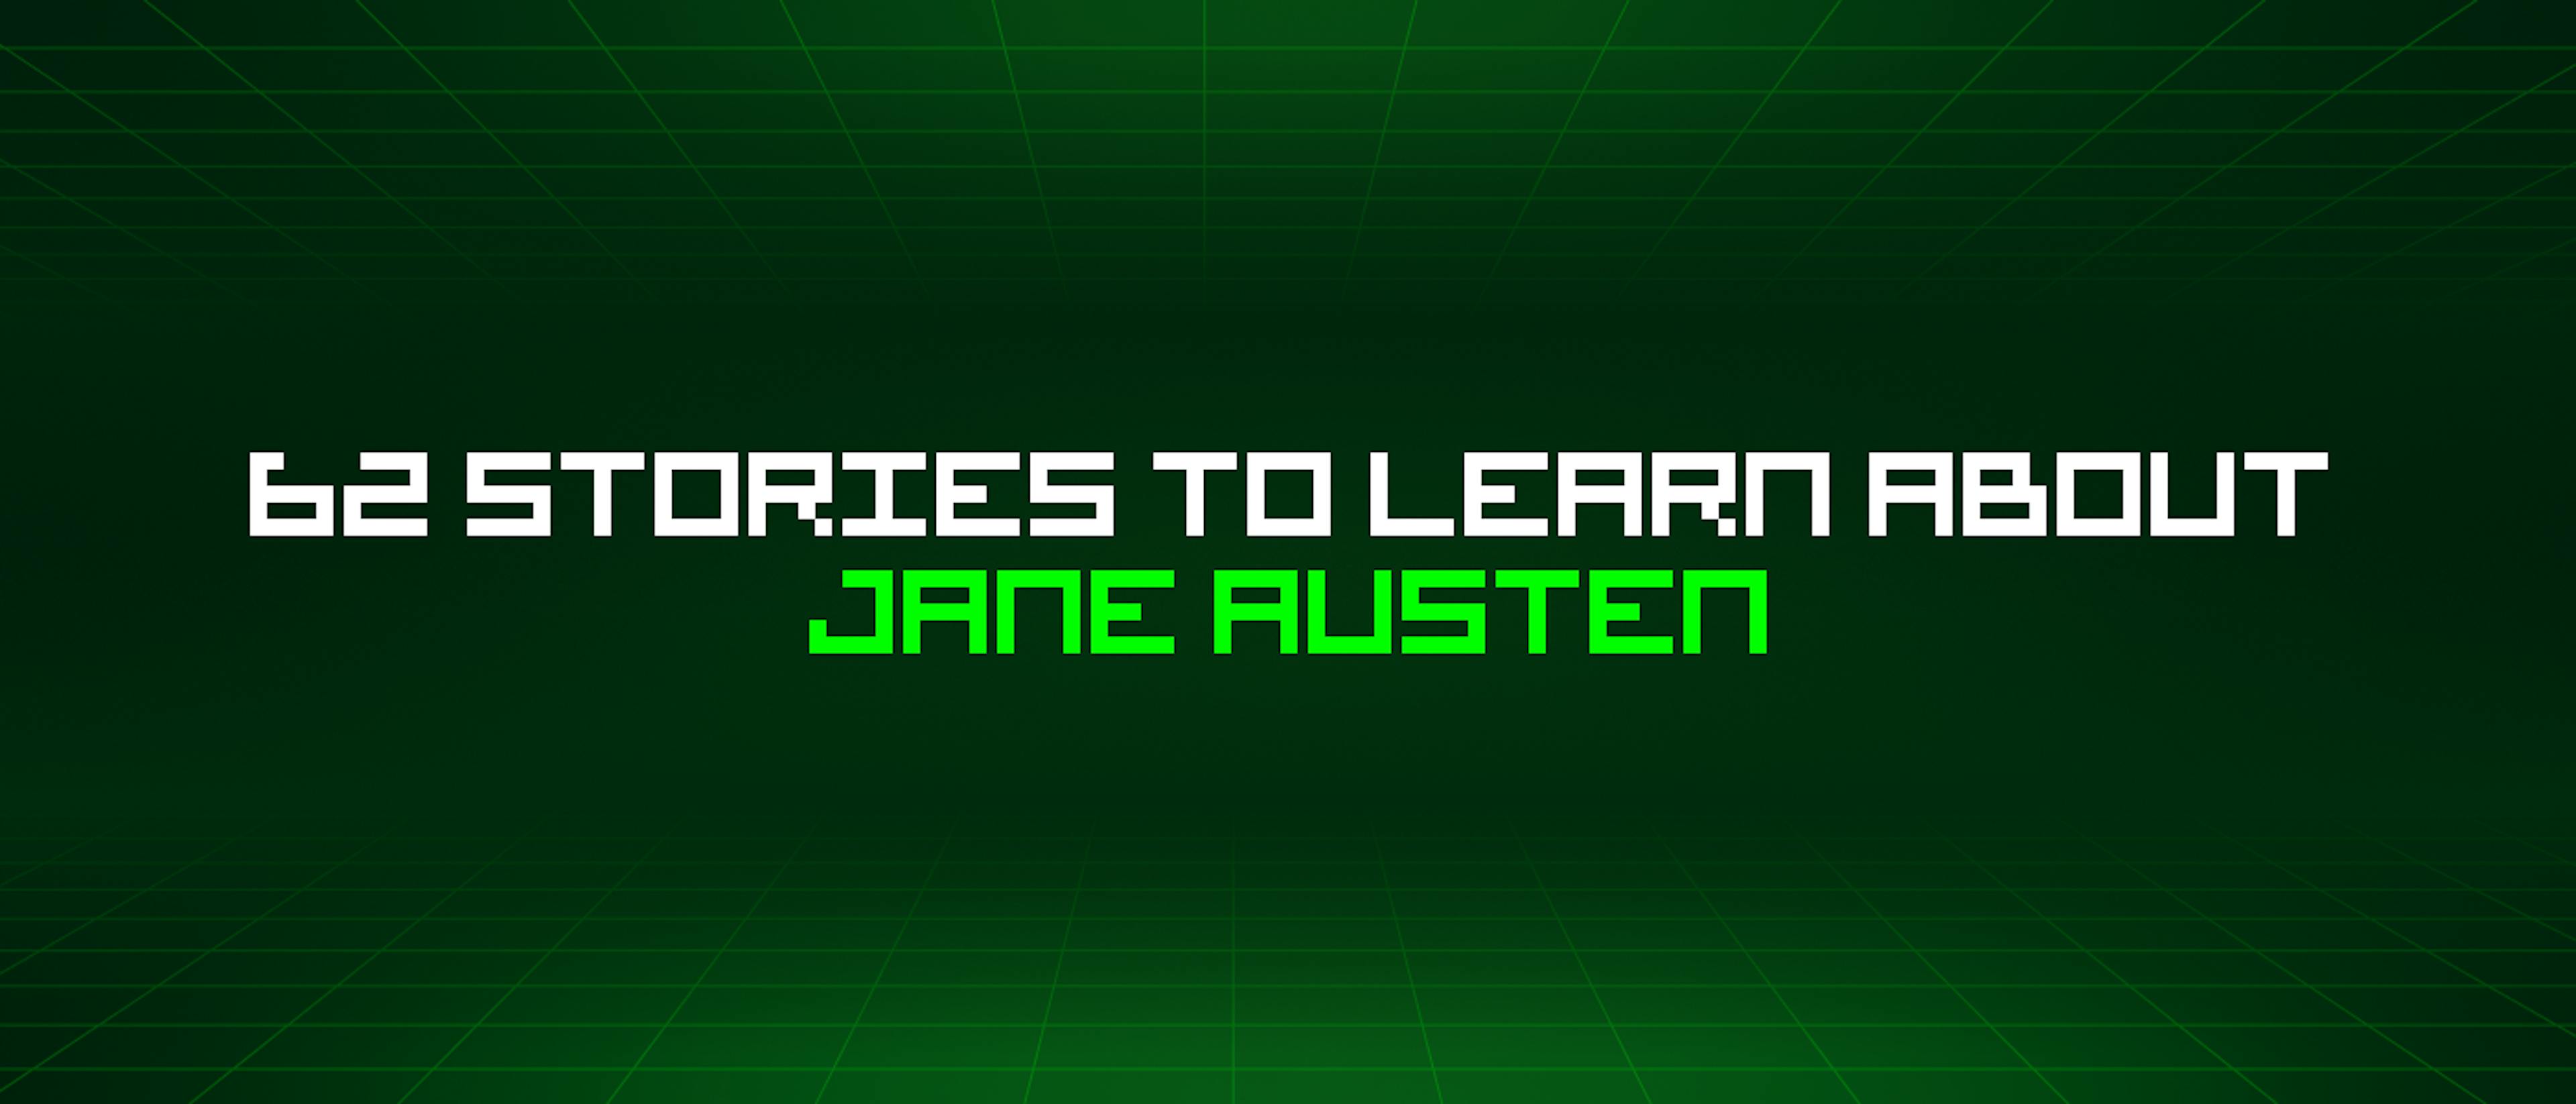 featured image - 62 Stories To Learn About Jane Austen